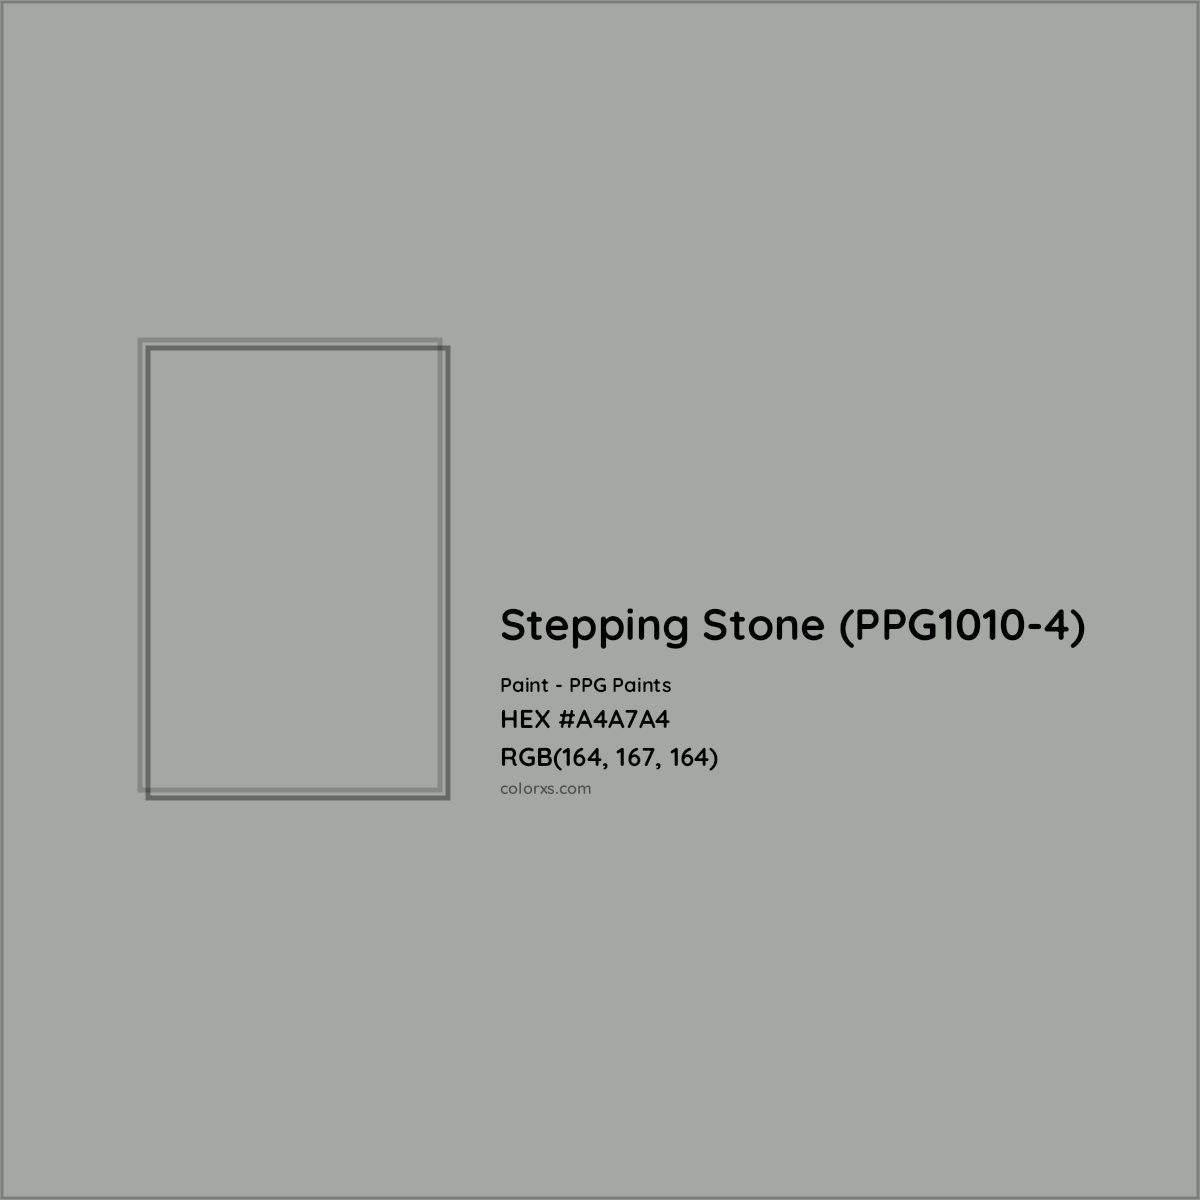 HEX #A4A7A4 Stepping Stone (PPG1010-4) Paint PPG Paints - Color Code